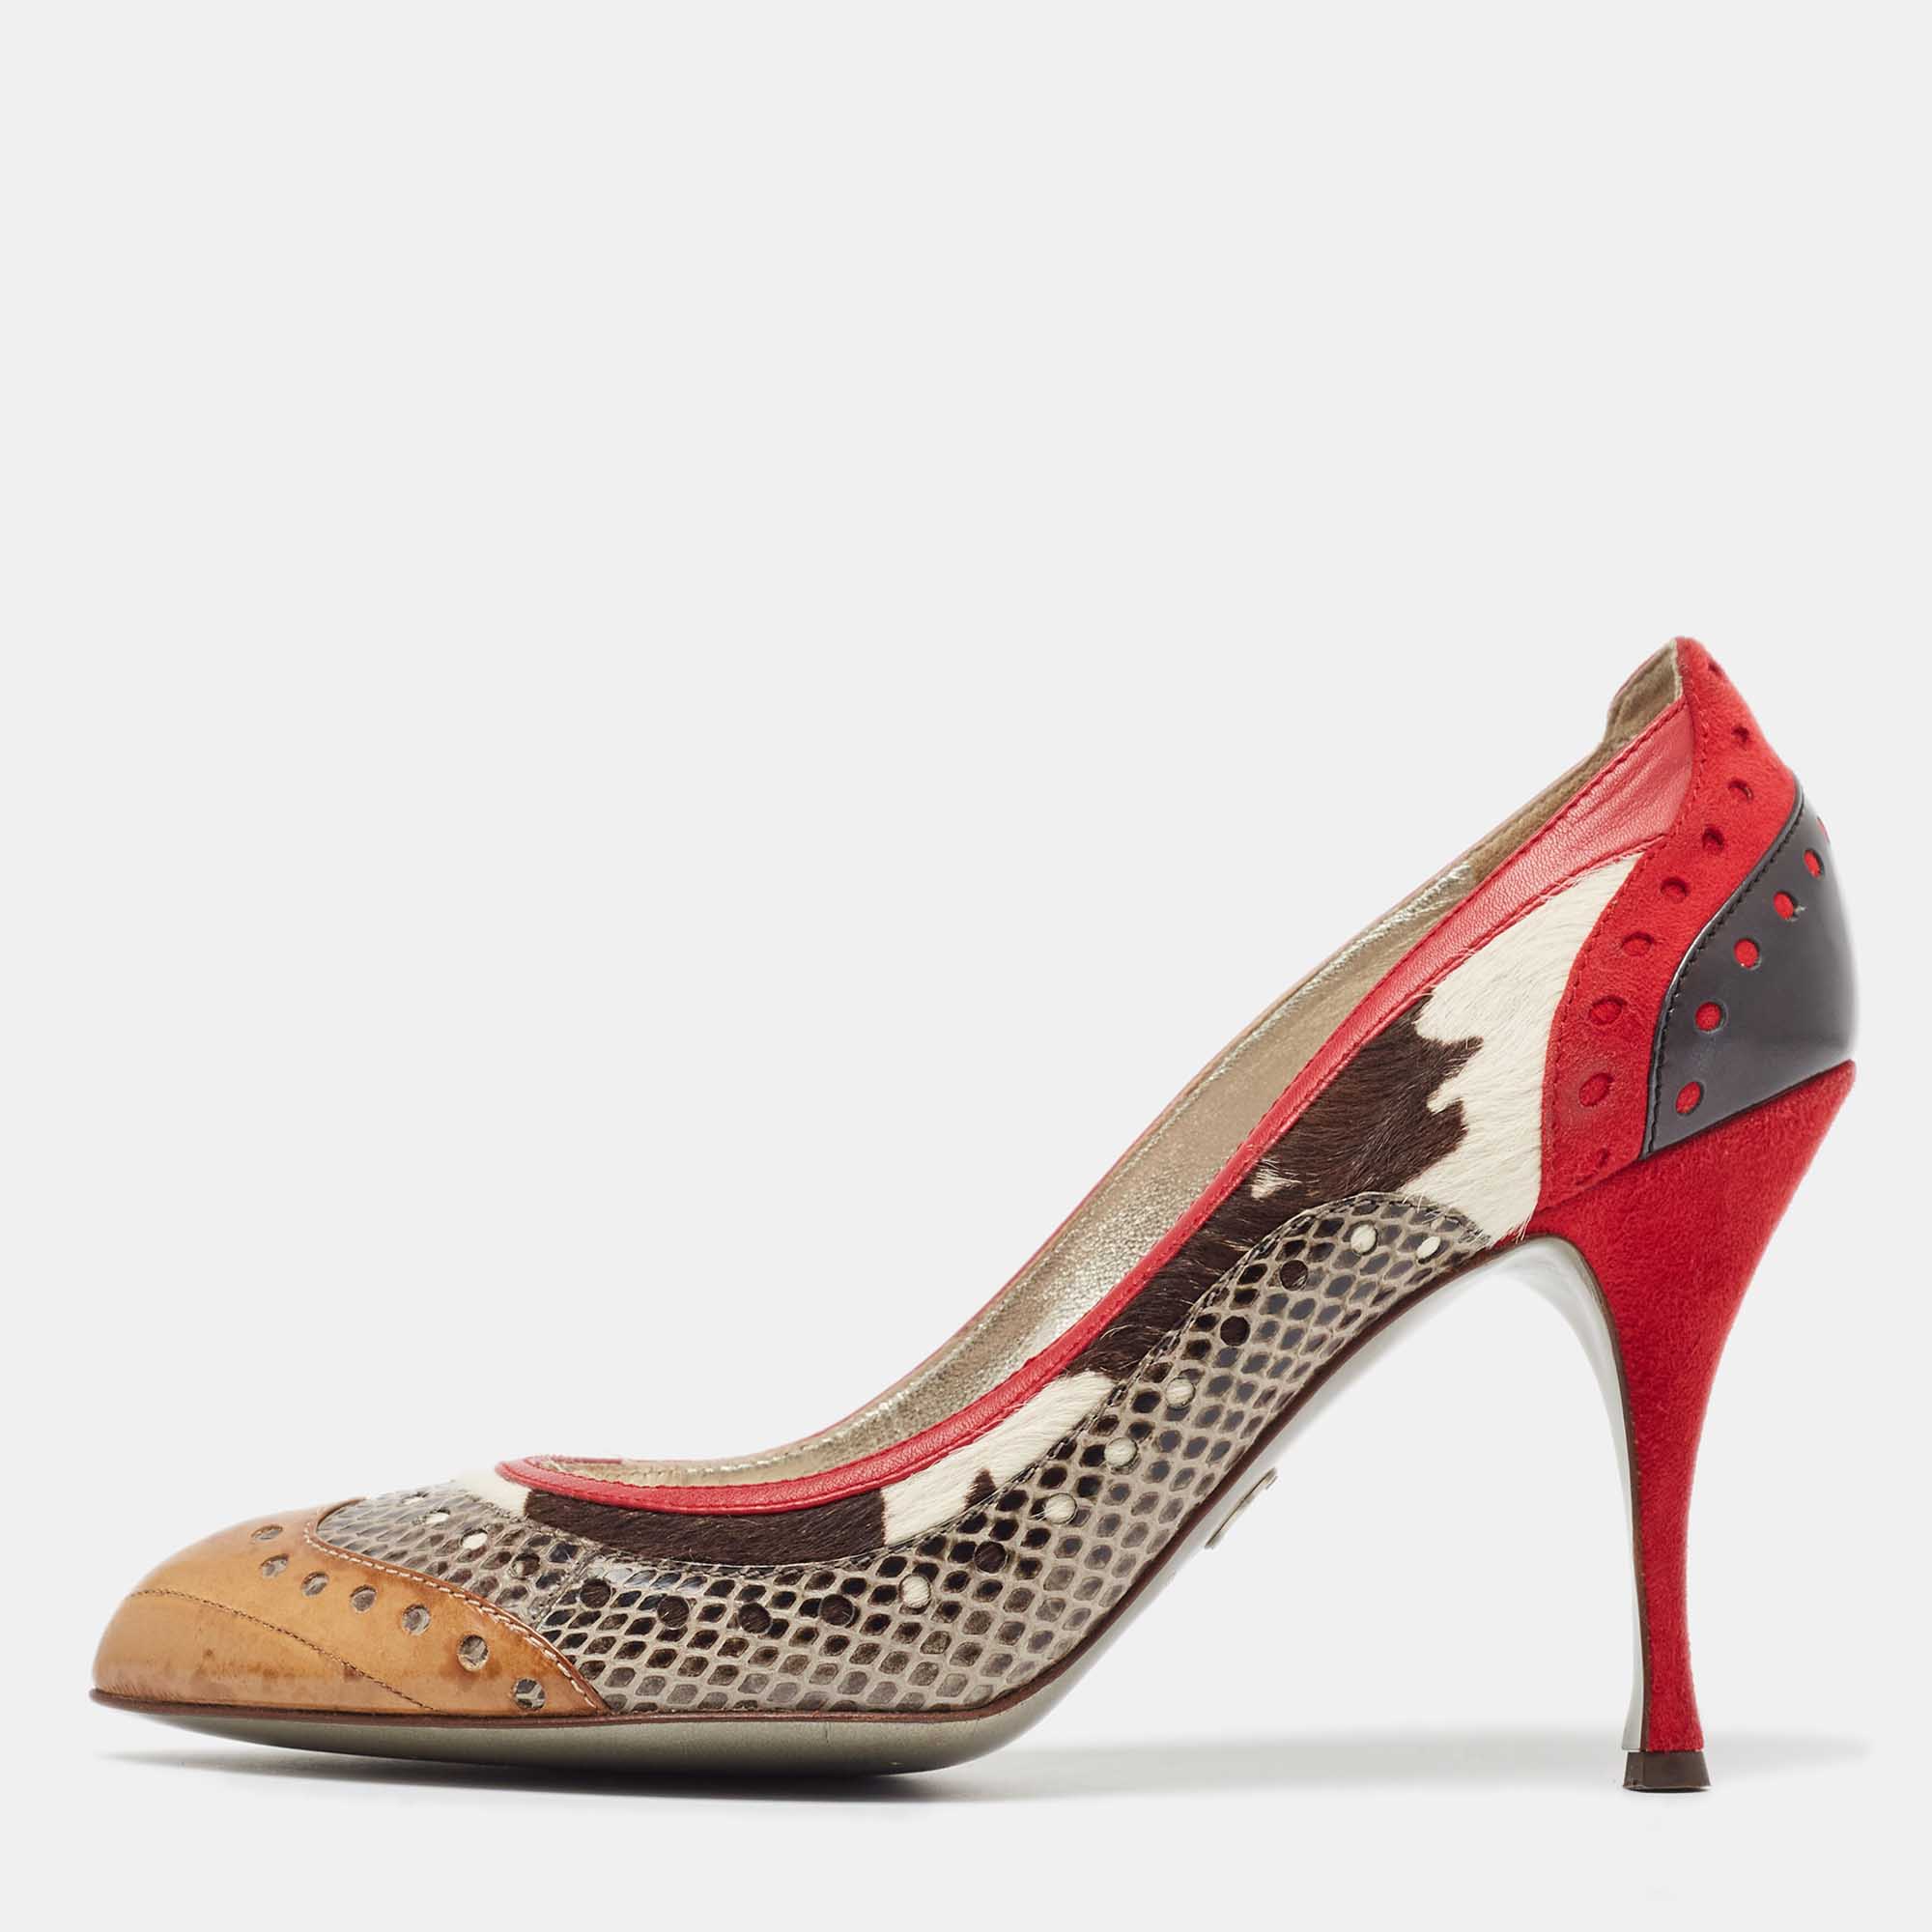 

Dolce & Gabbana Multicolor Snakeskin and Leather Pumps Size